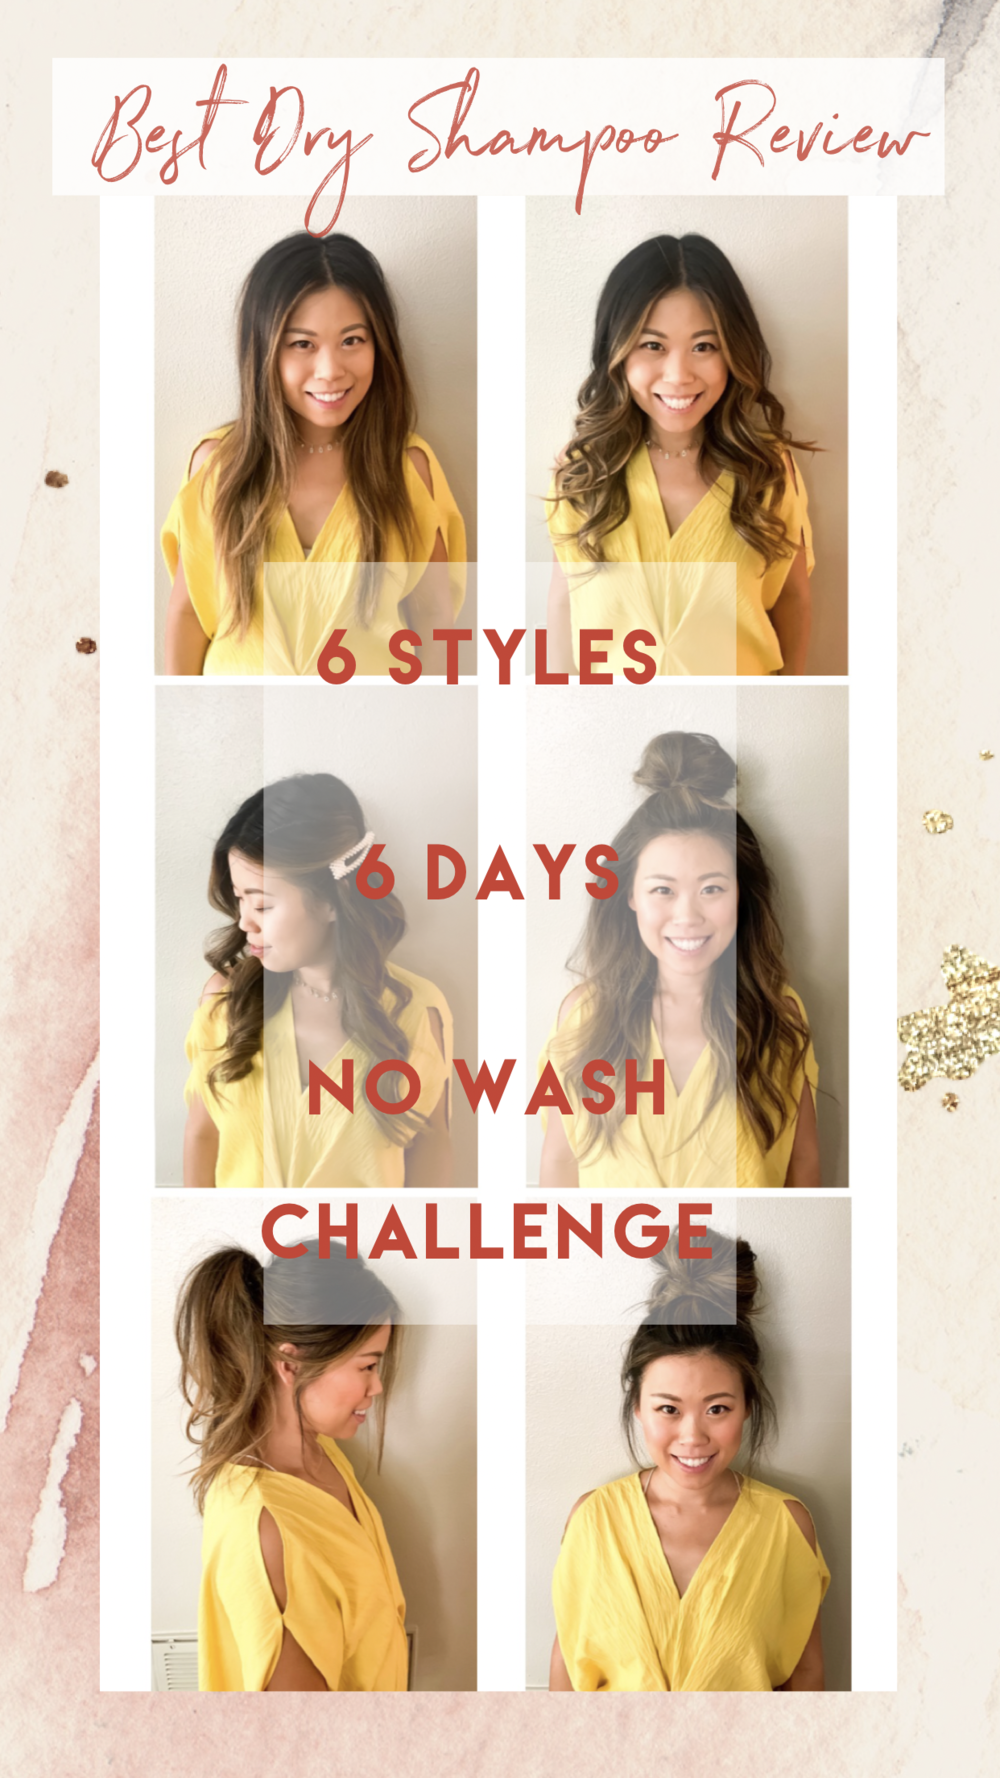 6 Hair Styles in 6 Days without Washing your Hair - Best Dry Shampoo Review  — JOYFULLY GREEN